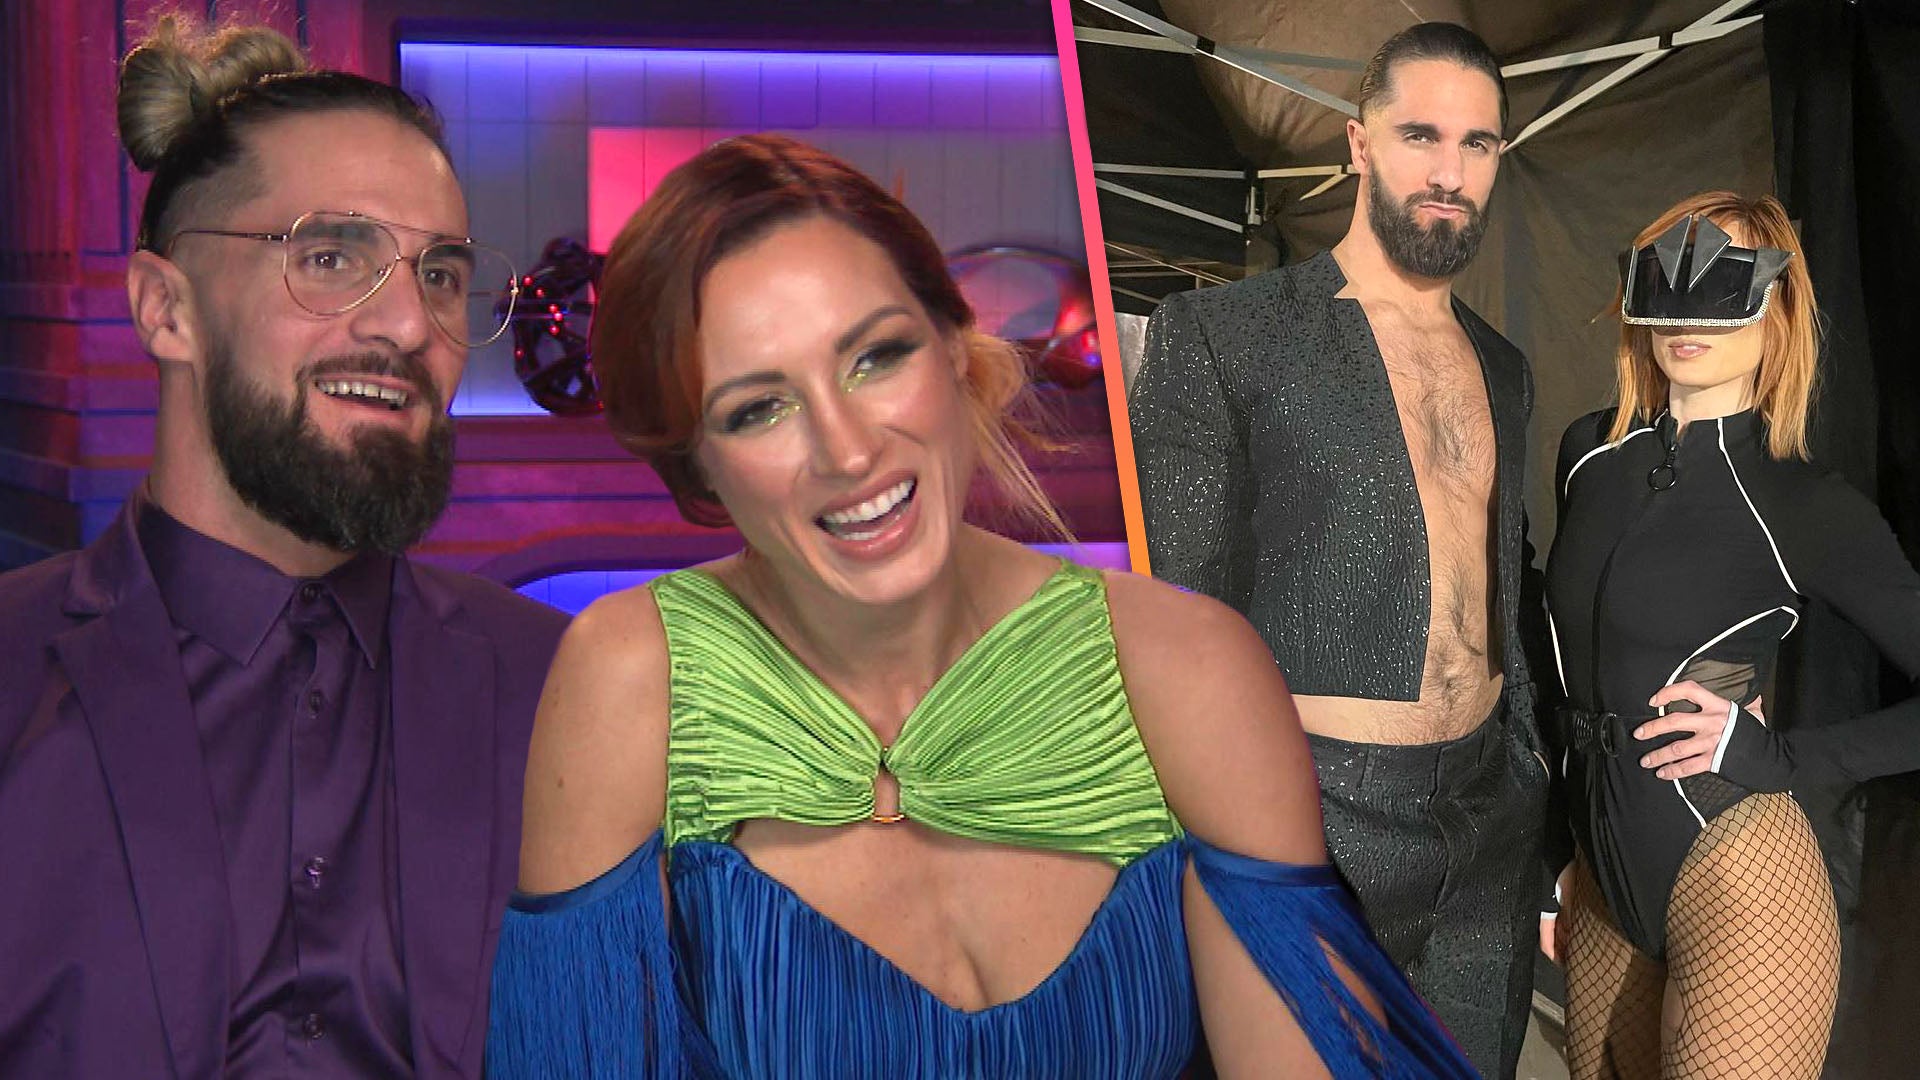 WWE's Seth Rollins and Becky Lynch gets engaged; see picture